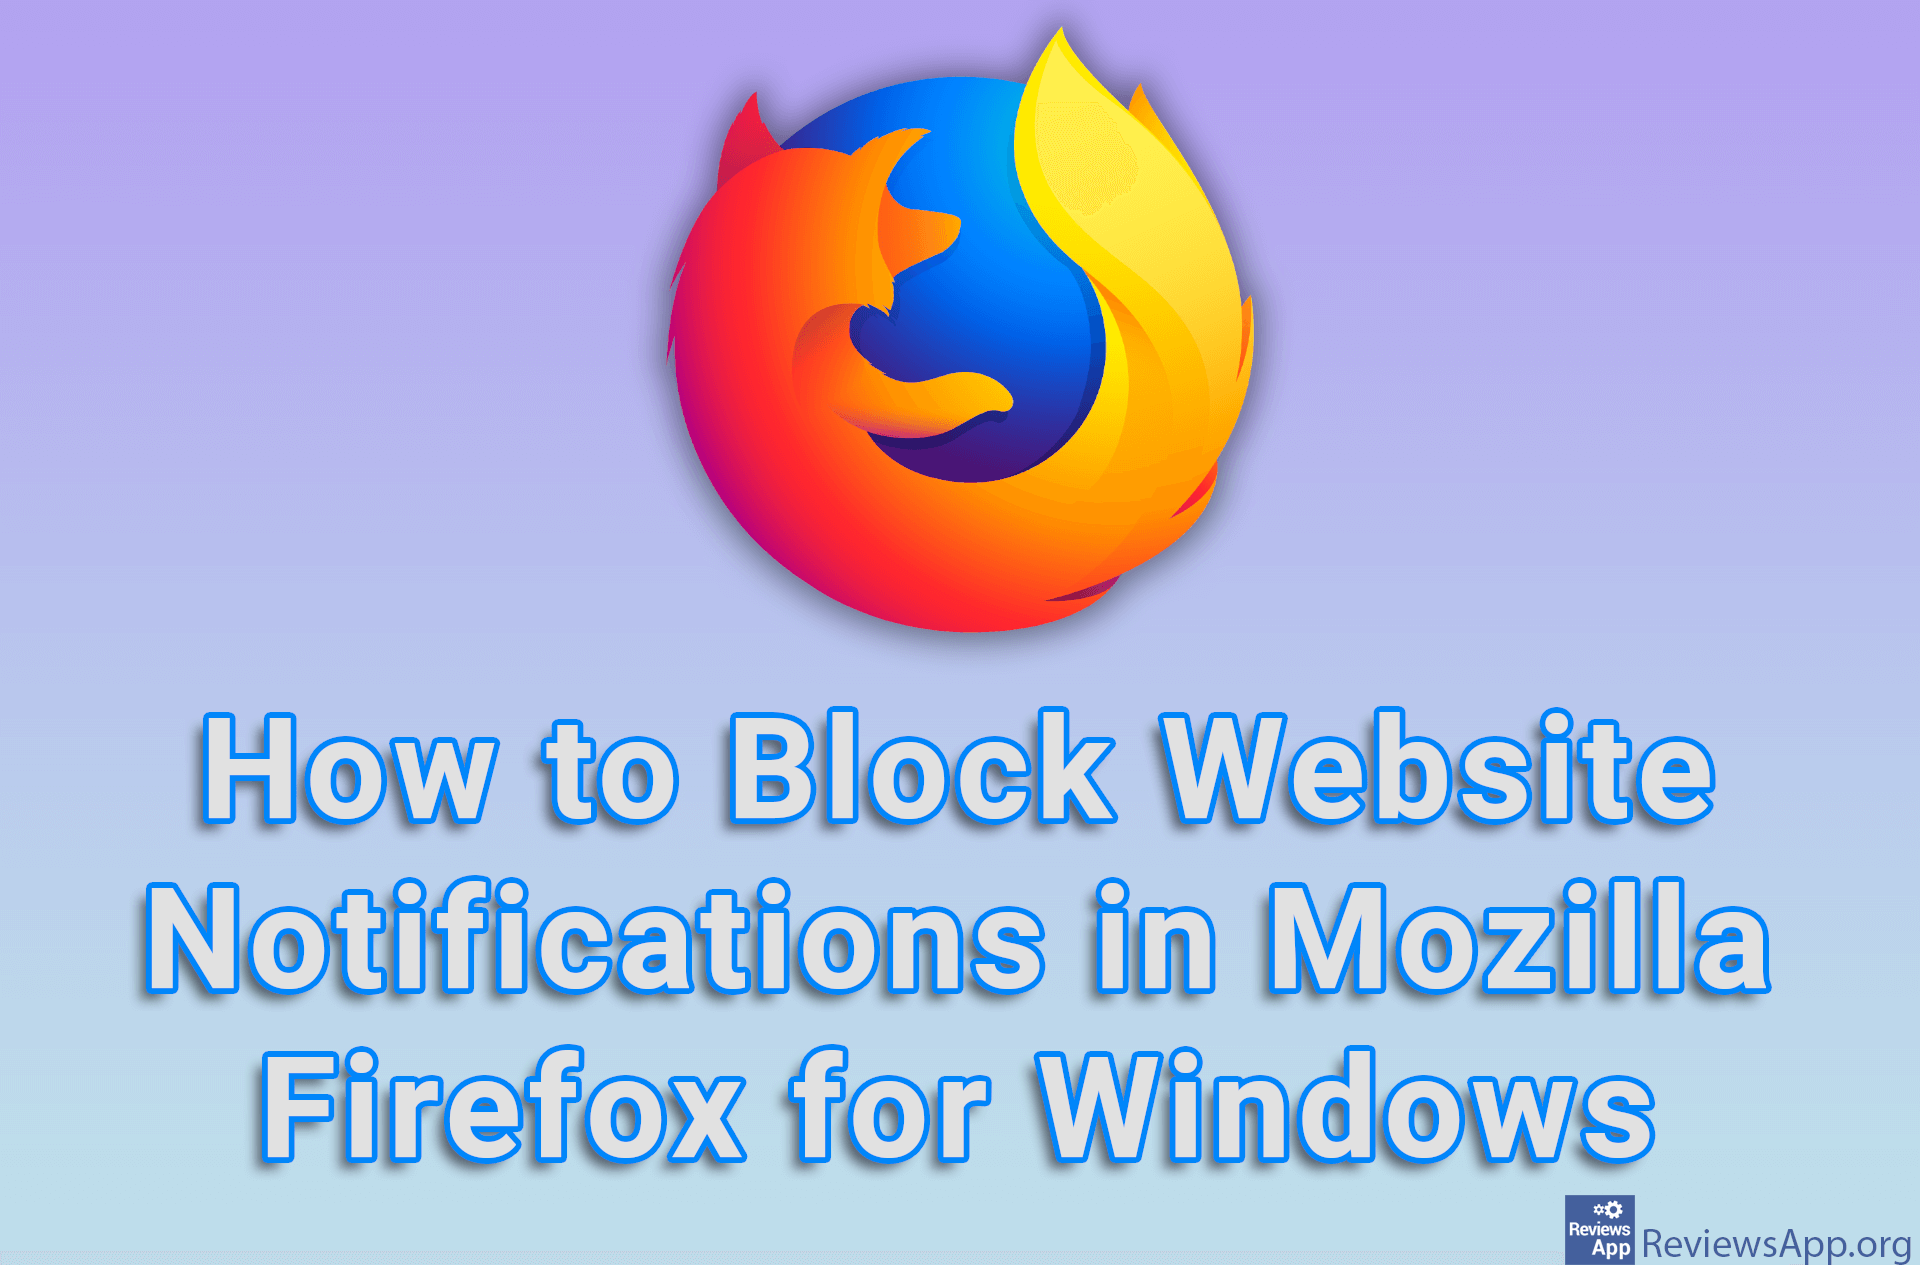 How to Block Website Notifications in Mozilla Firefox for Windows